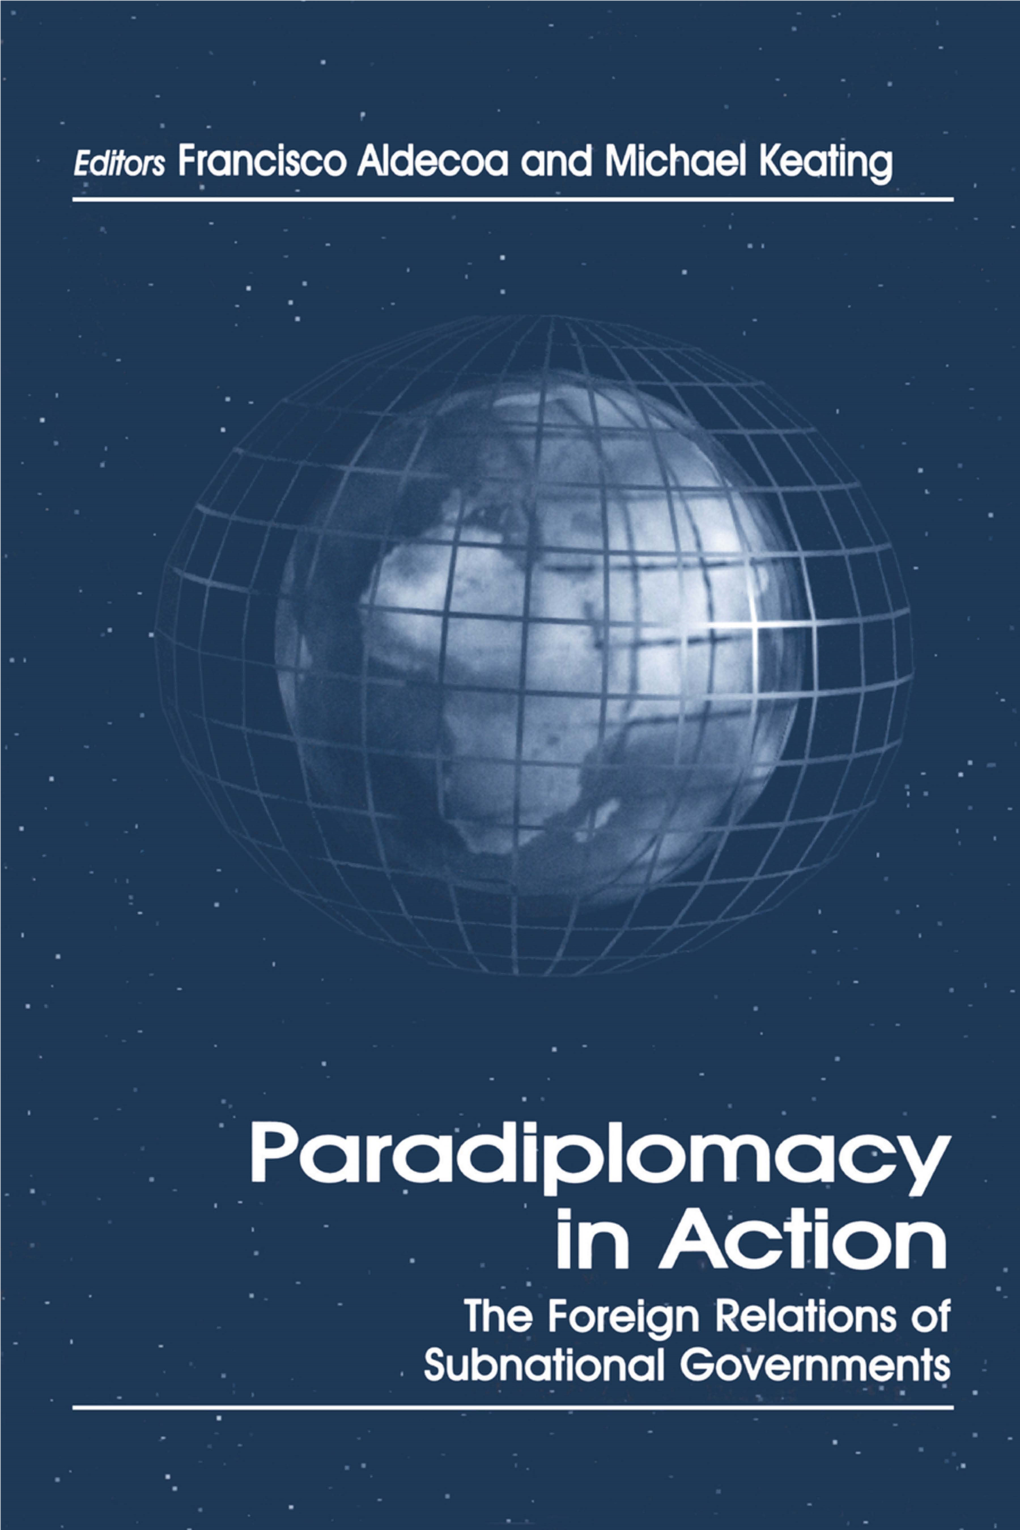 PARADIPLOMACY in ACTION the Foreign Relations of Subnational Governments